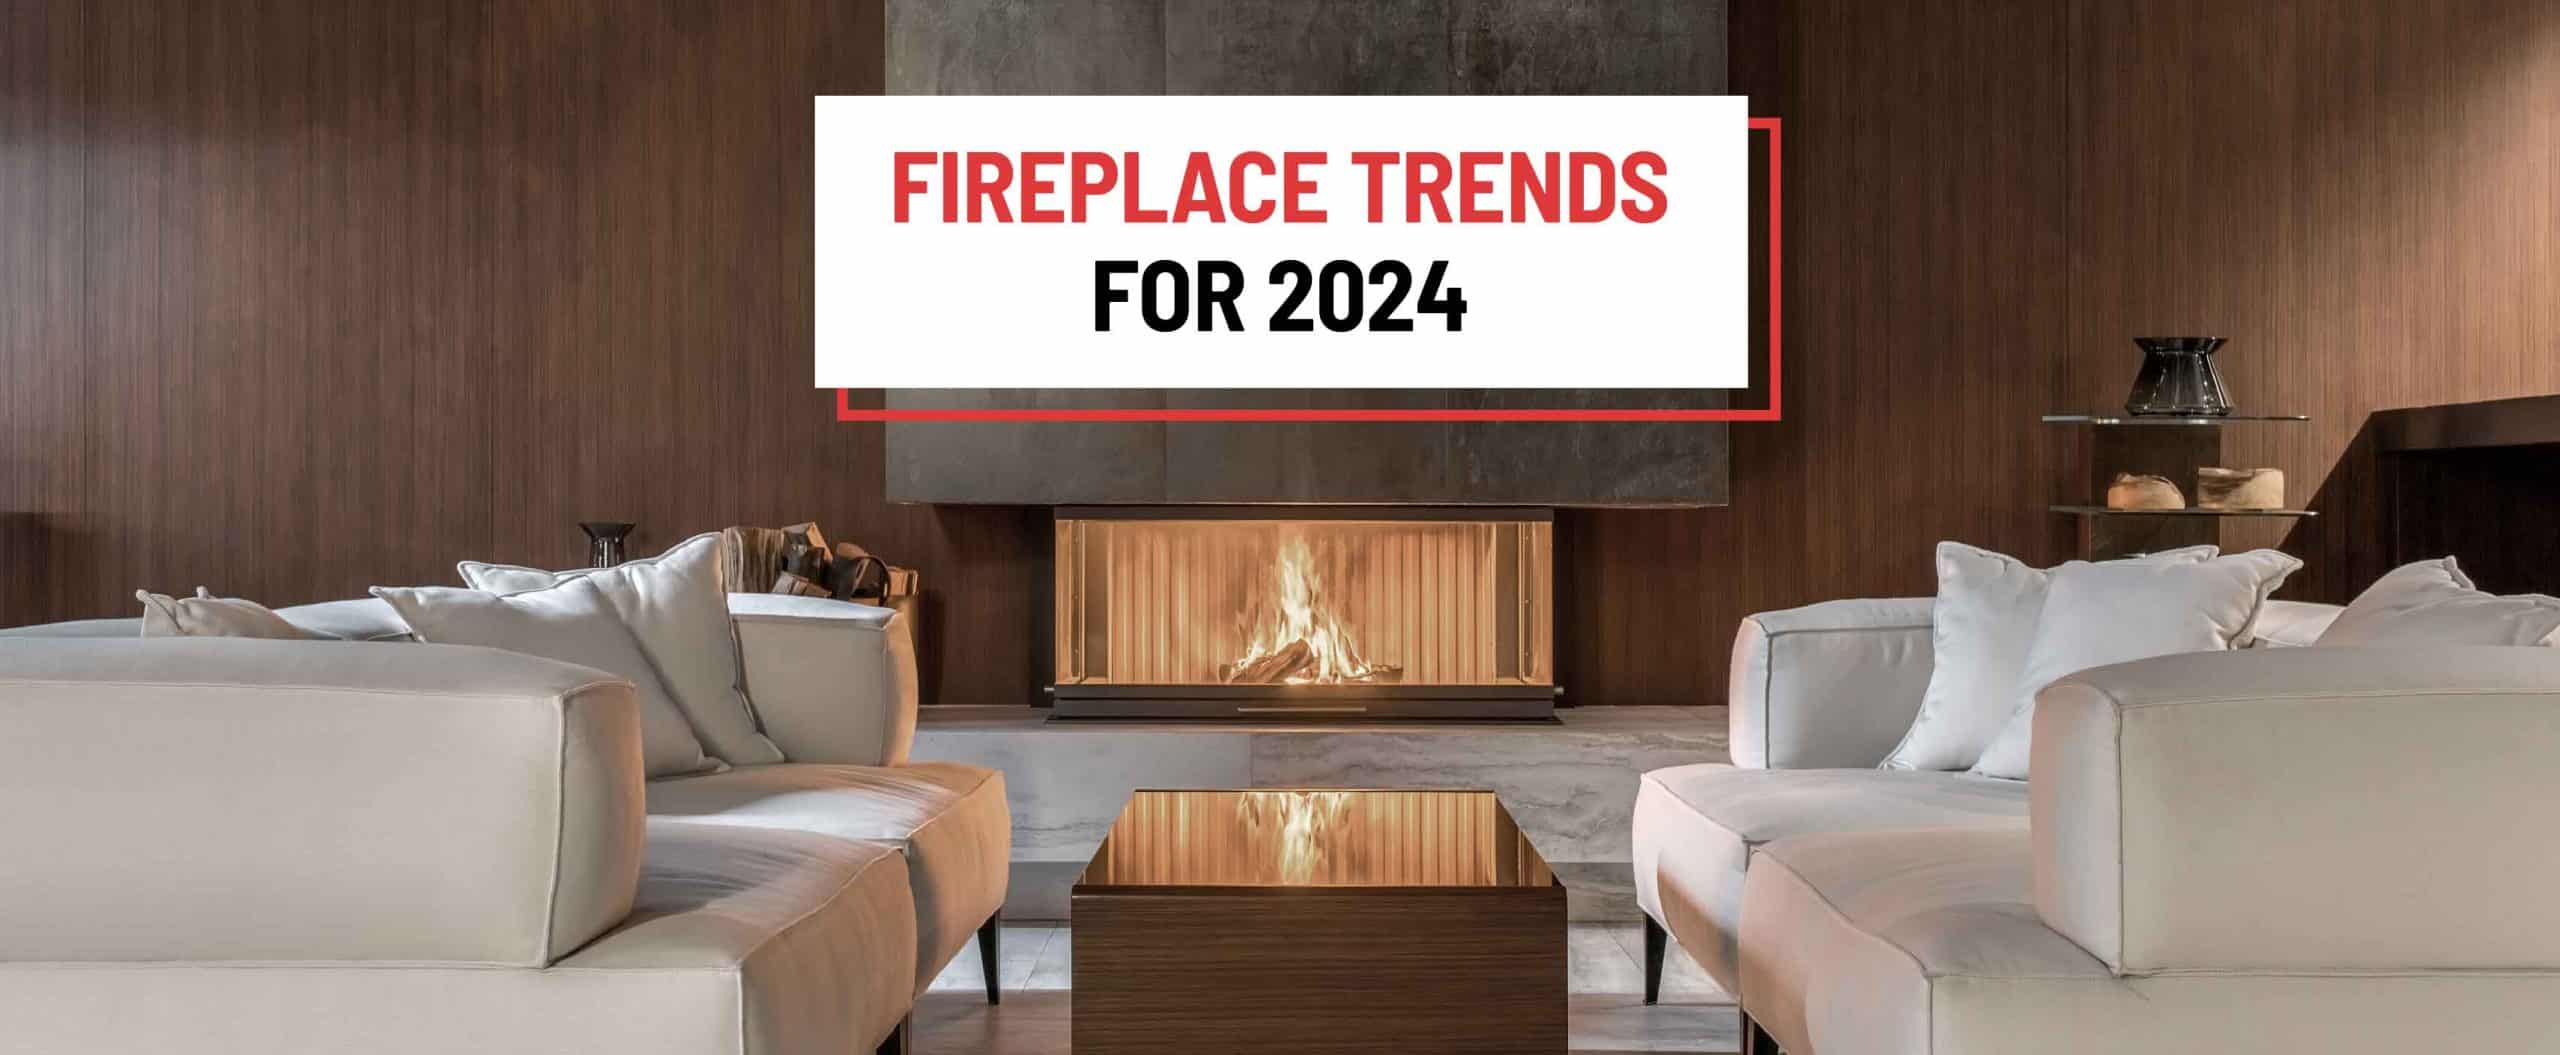 fireplace trends 2024